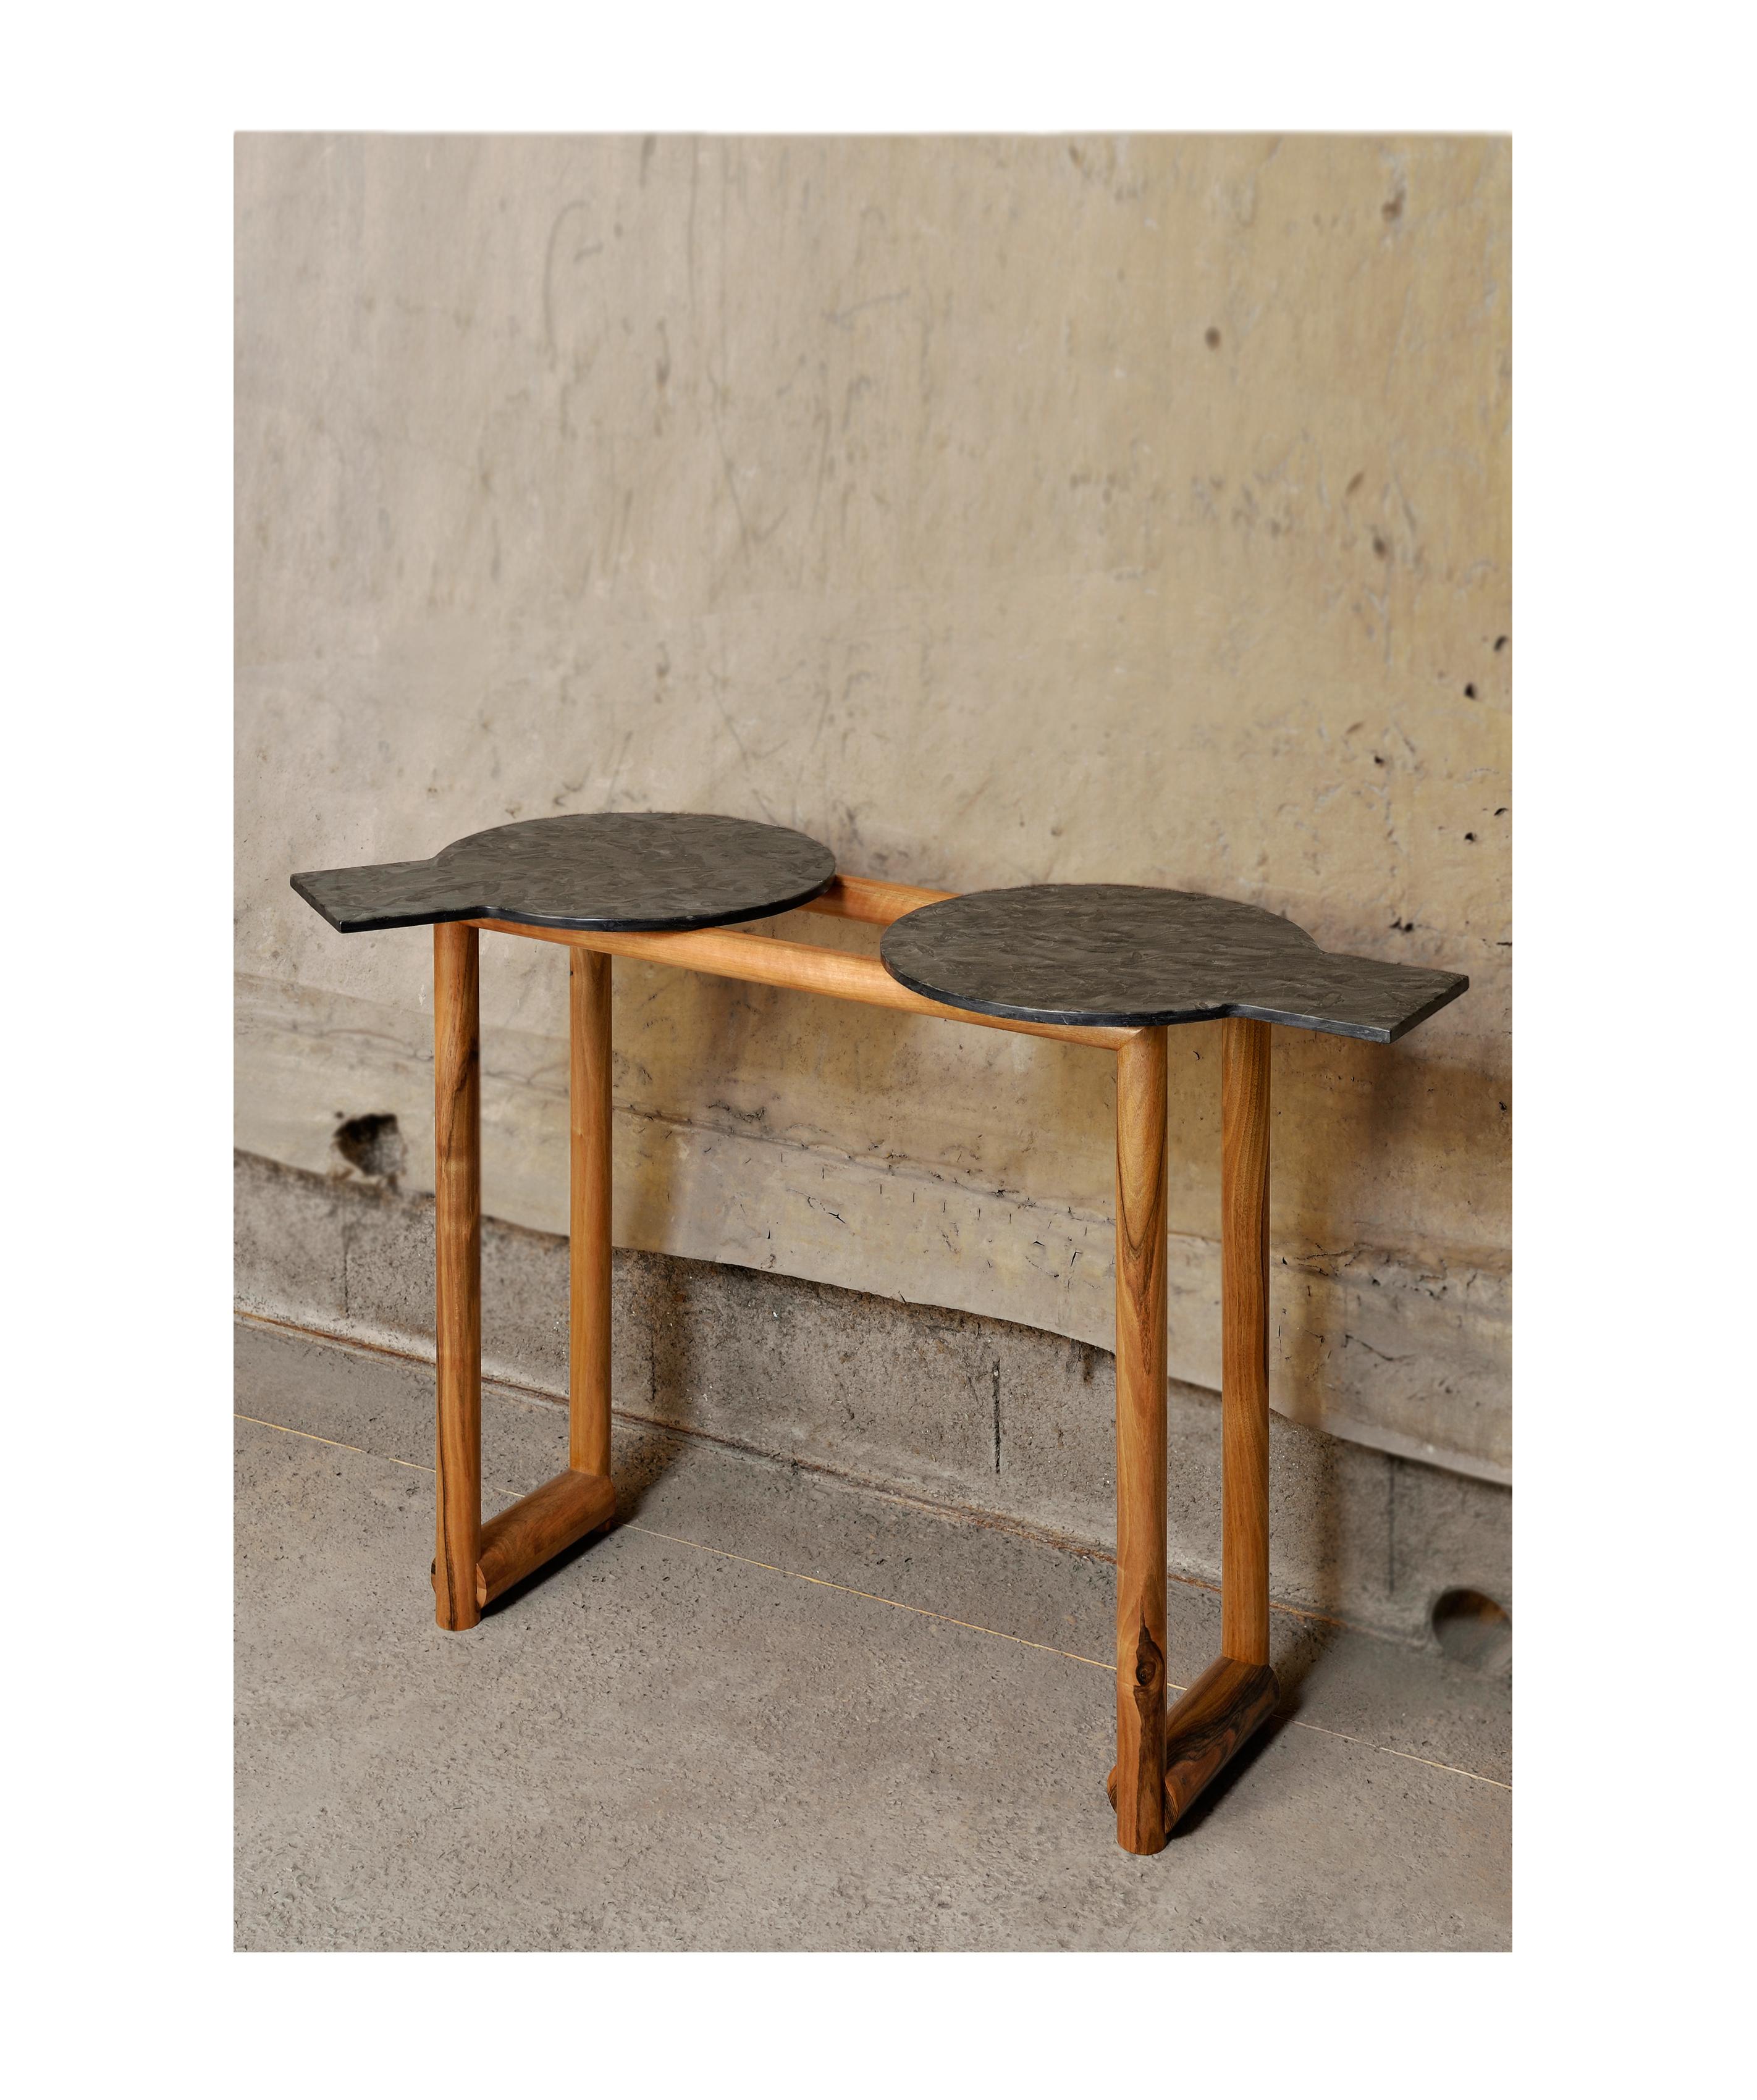 Adrienne console by Kaaron
Dress and play
Limited Edition of 12 pieces
Materials: Matrix quartzite, wood walnut, France
Dimensions: Length 135 cm x diameter top 45 cm x height 90 cm  

Handcraft in France.
Top free to